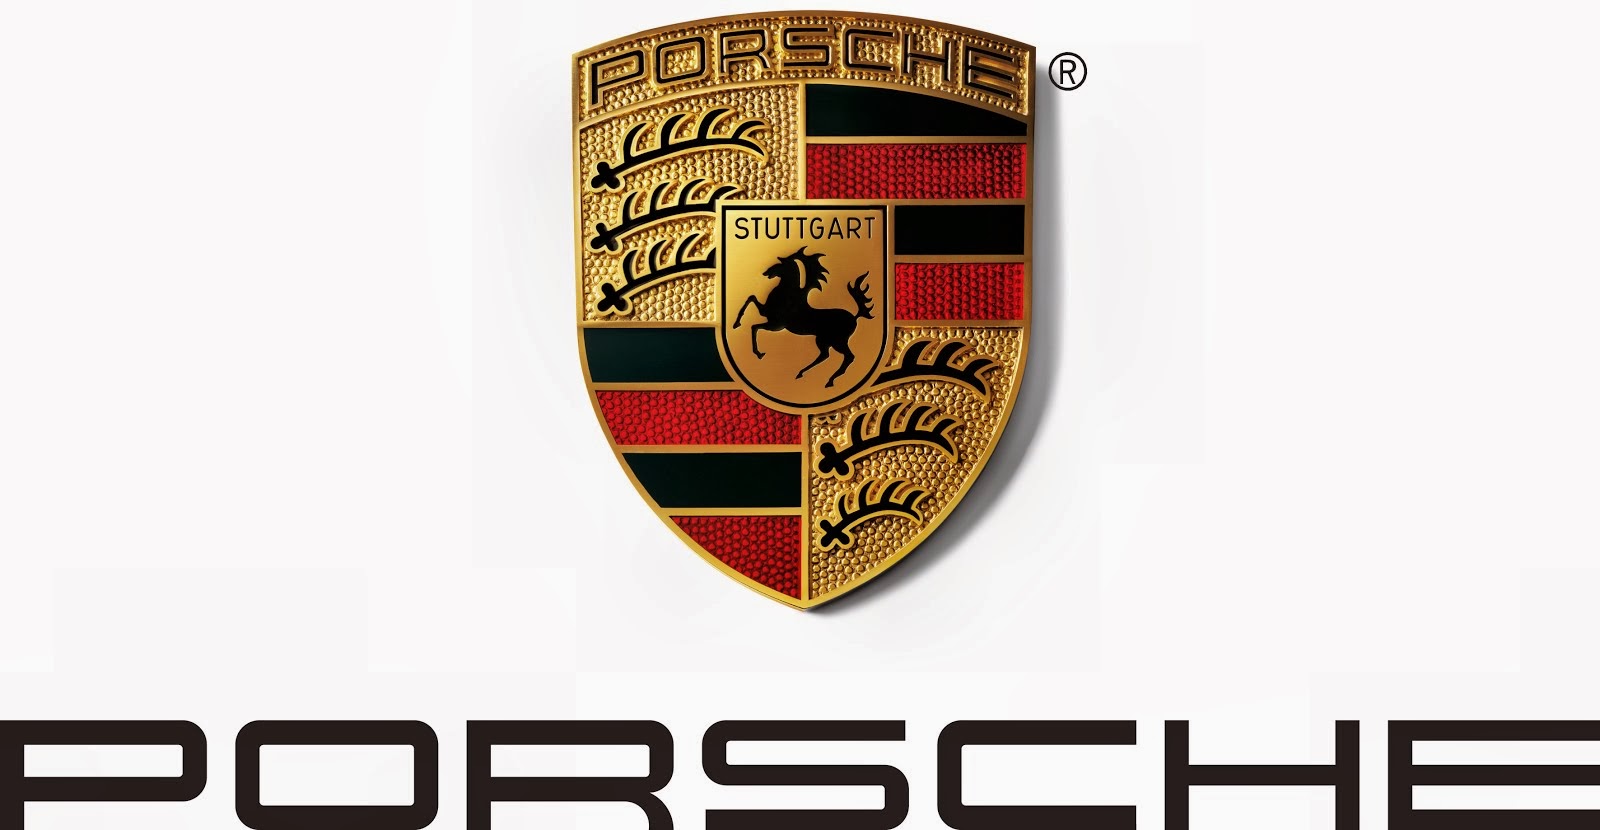 Porsche - there is no substitute